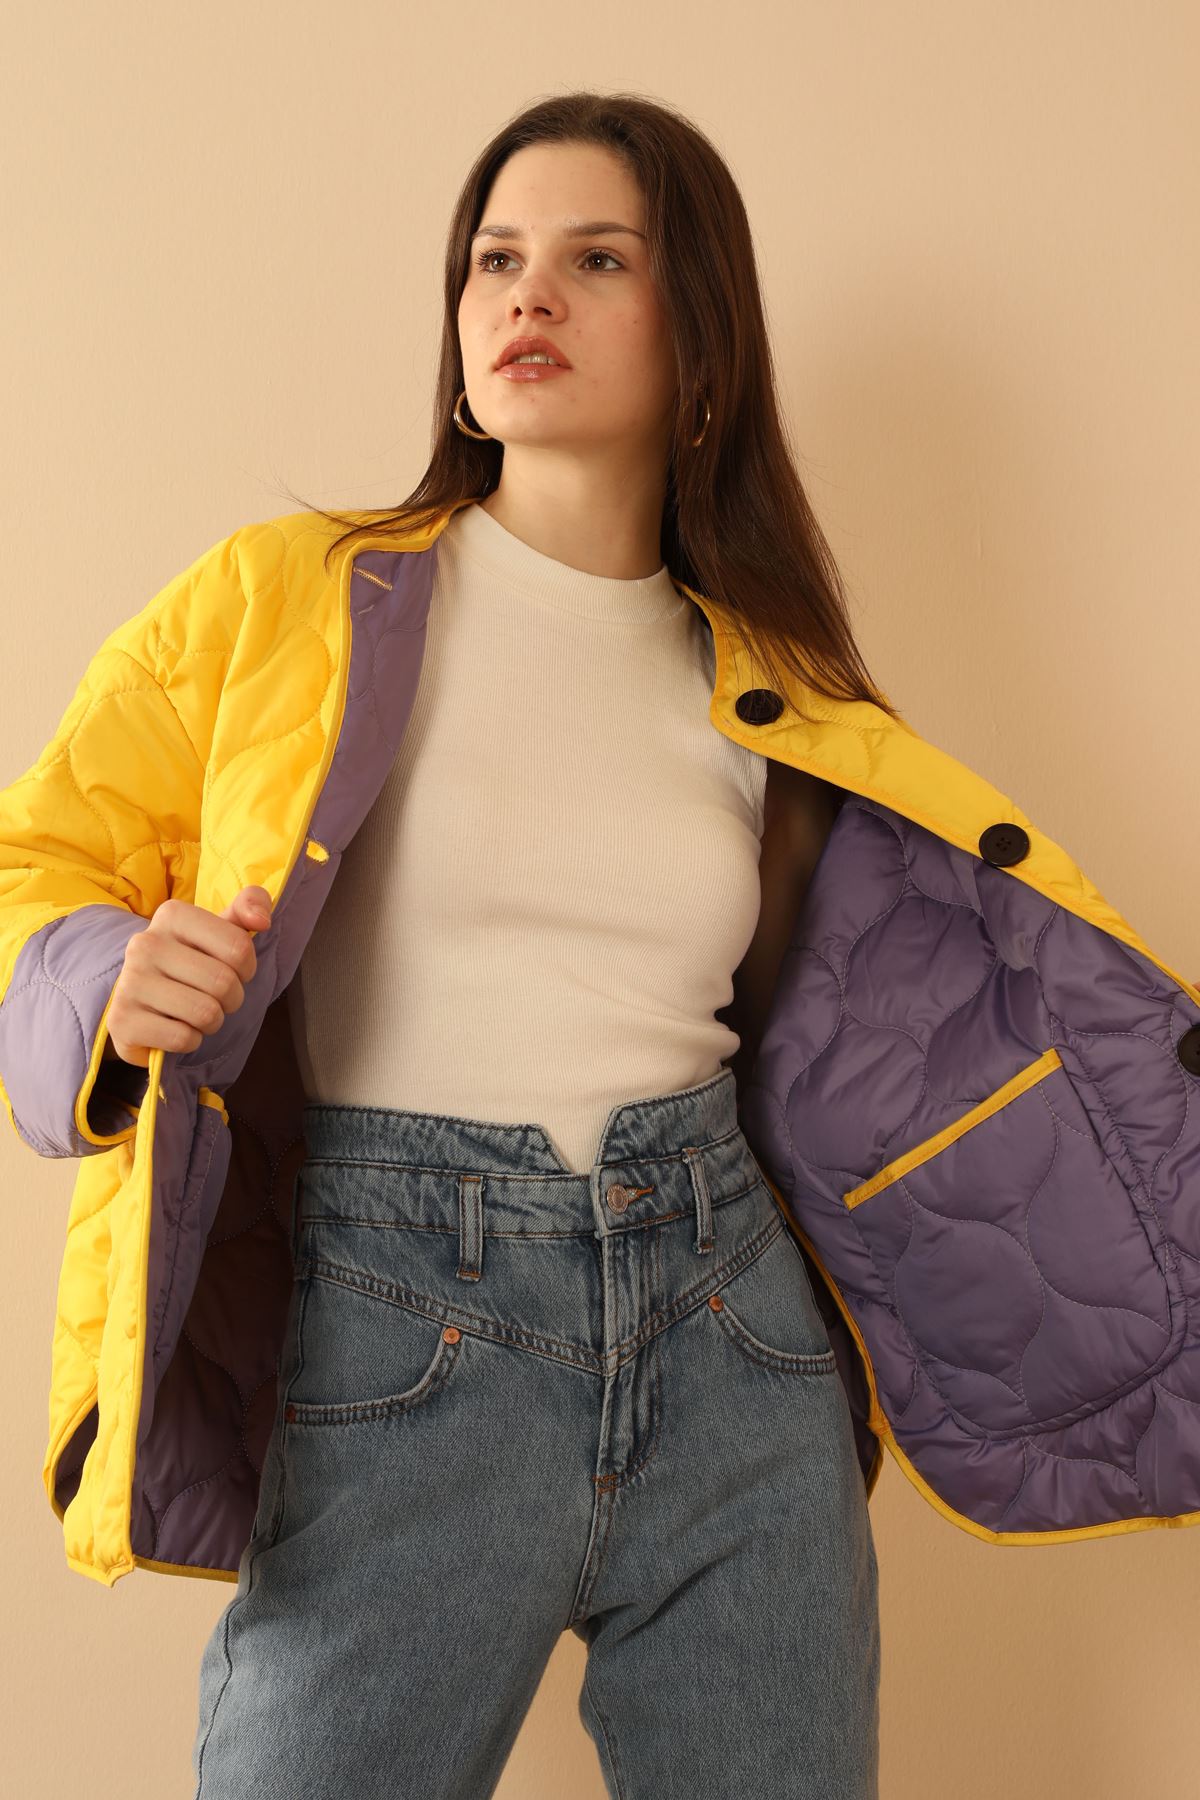 A model wears 33822 - Double Sided Coat - Yellow And Lilac, wholesale Coat of Kaktus Moda to display at Lonca